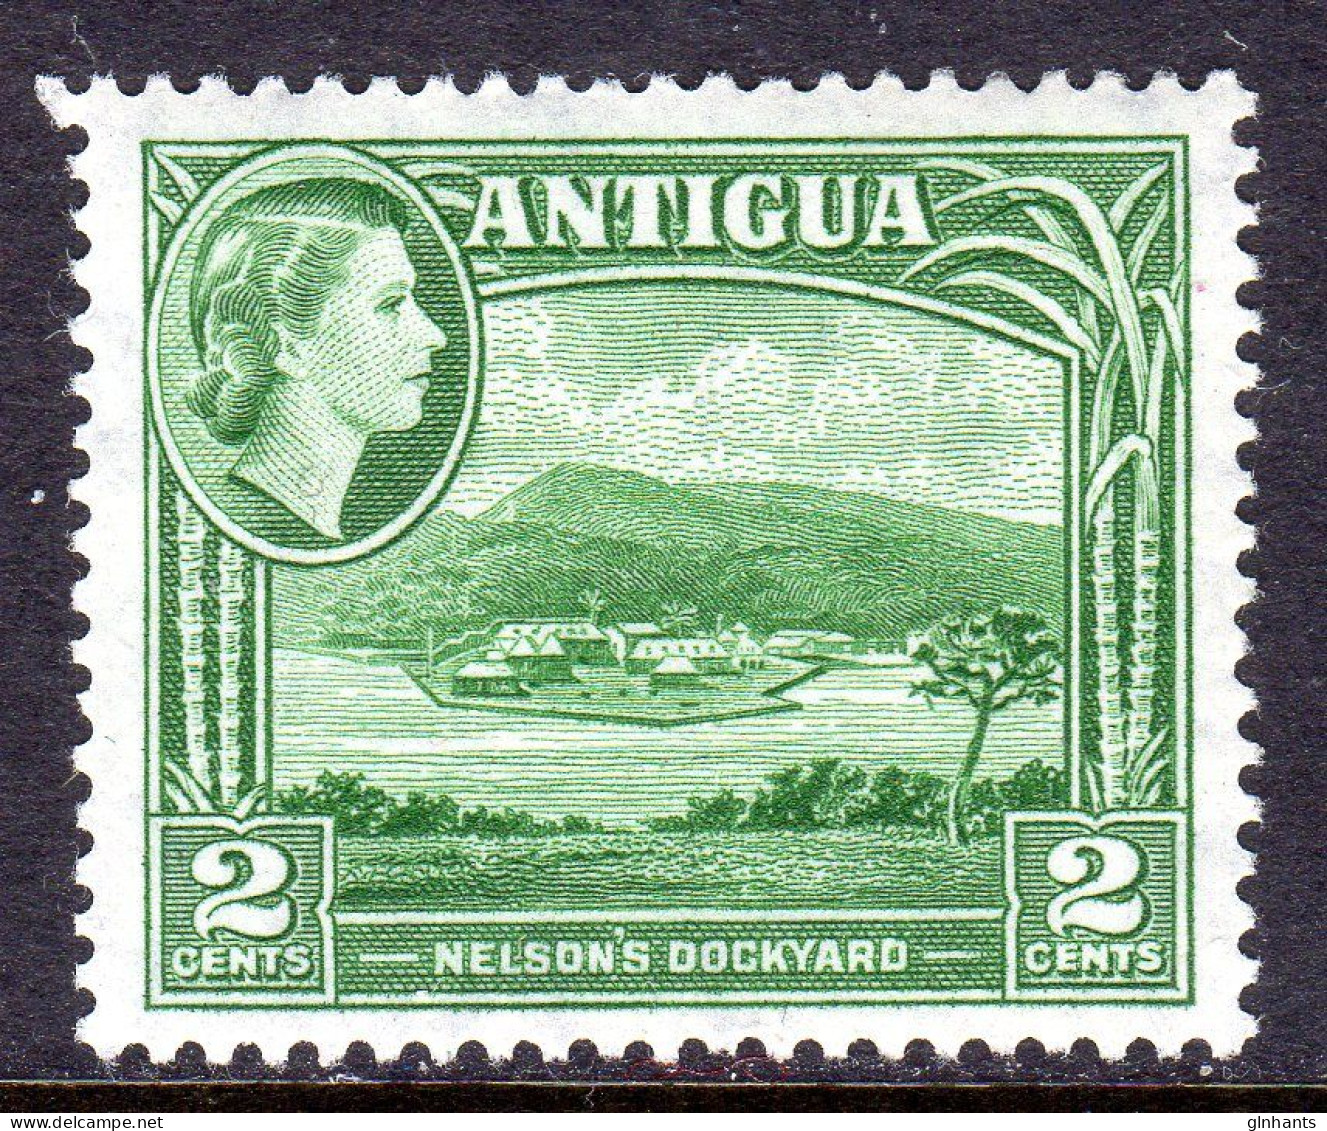 ANTIGUA - 1963-1965 DEFINITIVE 2c STAMP WMK W12 FINE MOUNTED MINT MM * SG 151 REF D - 1960-1981 Ministerial Government